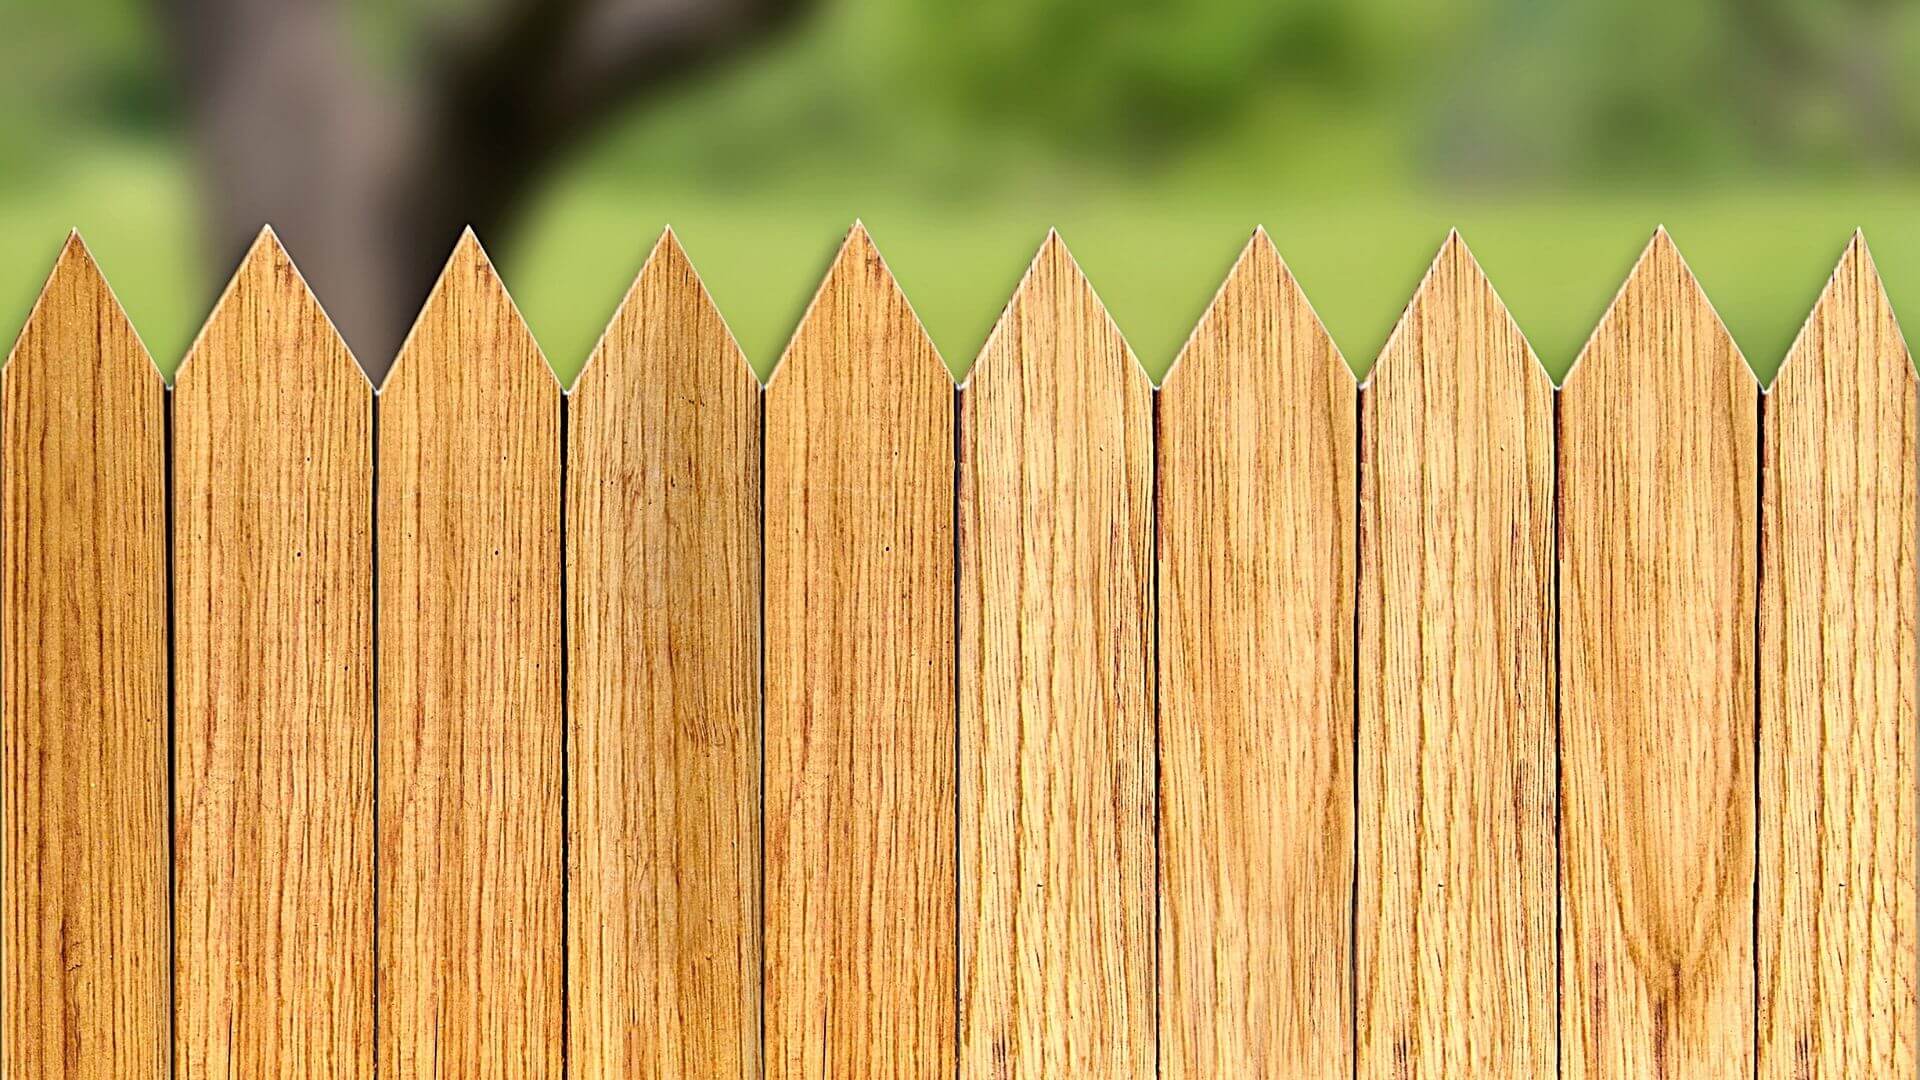 Residential wood fence